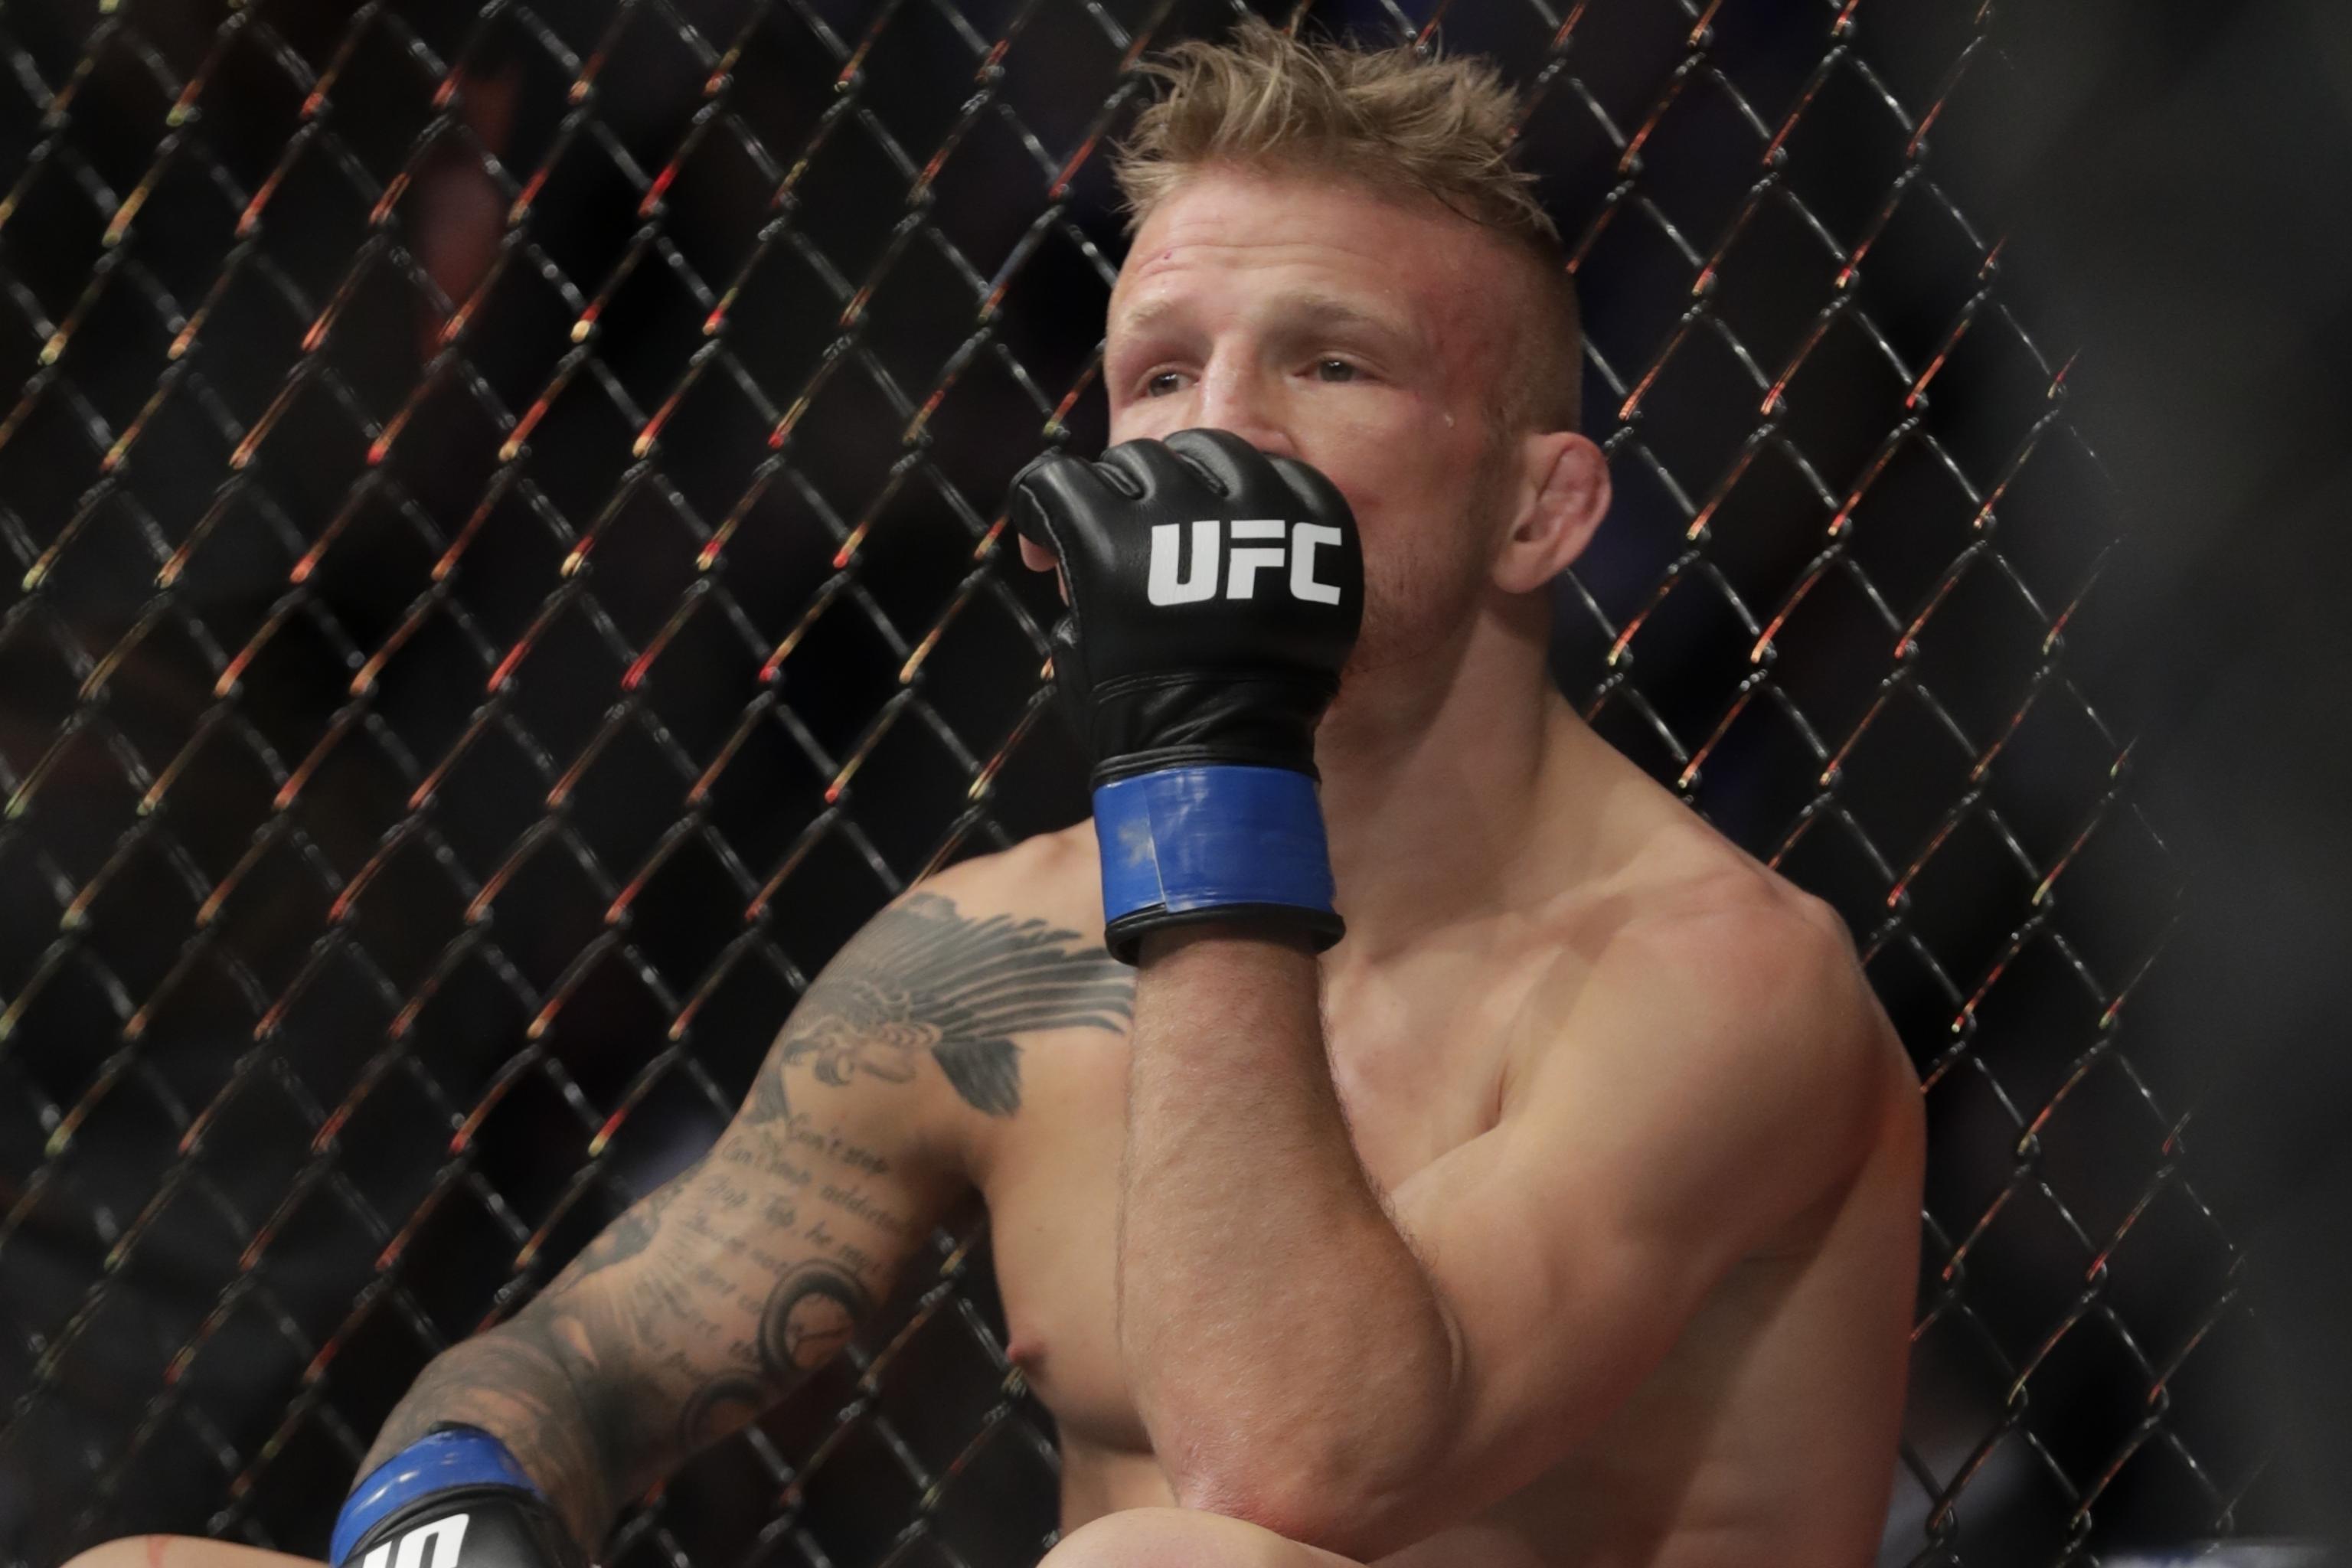 Ex-UFC Champion TJ Dillashaw Suspended 2 Years for Anti-Doping Violation | Bleacher Report | Latest News, Videos and Highlights